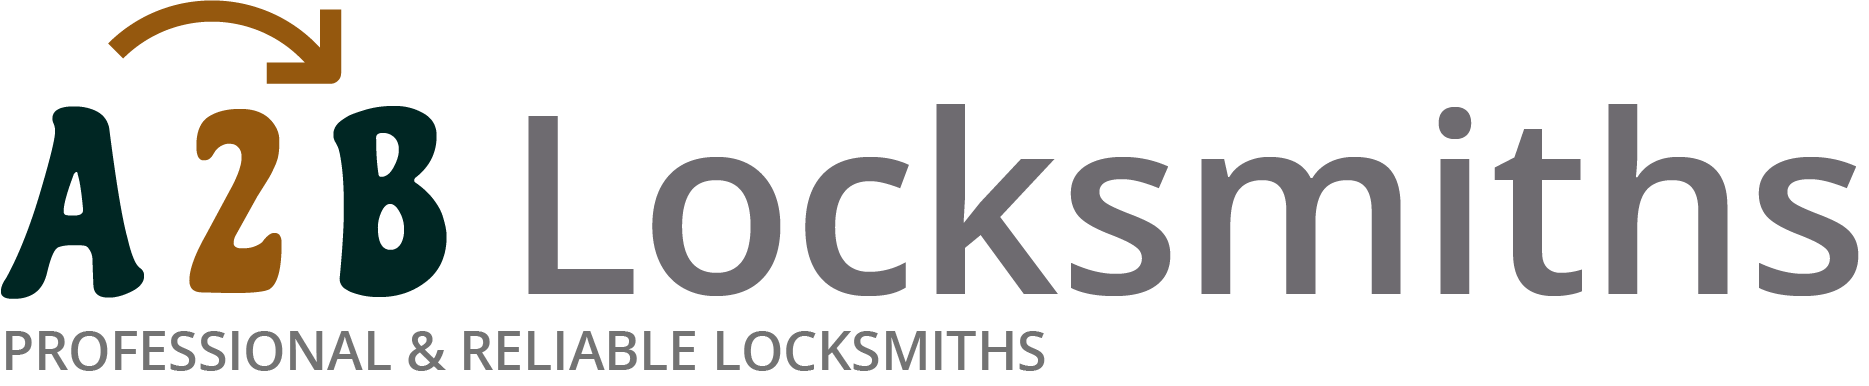 If you are locked out of house in Beaconsfield, our 24/7 local emergency locksmith services can help you.